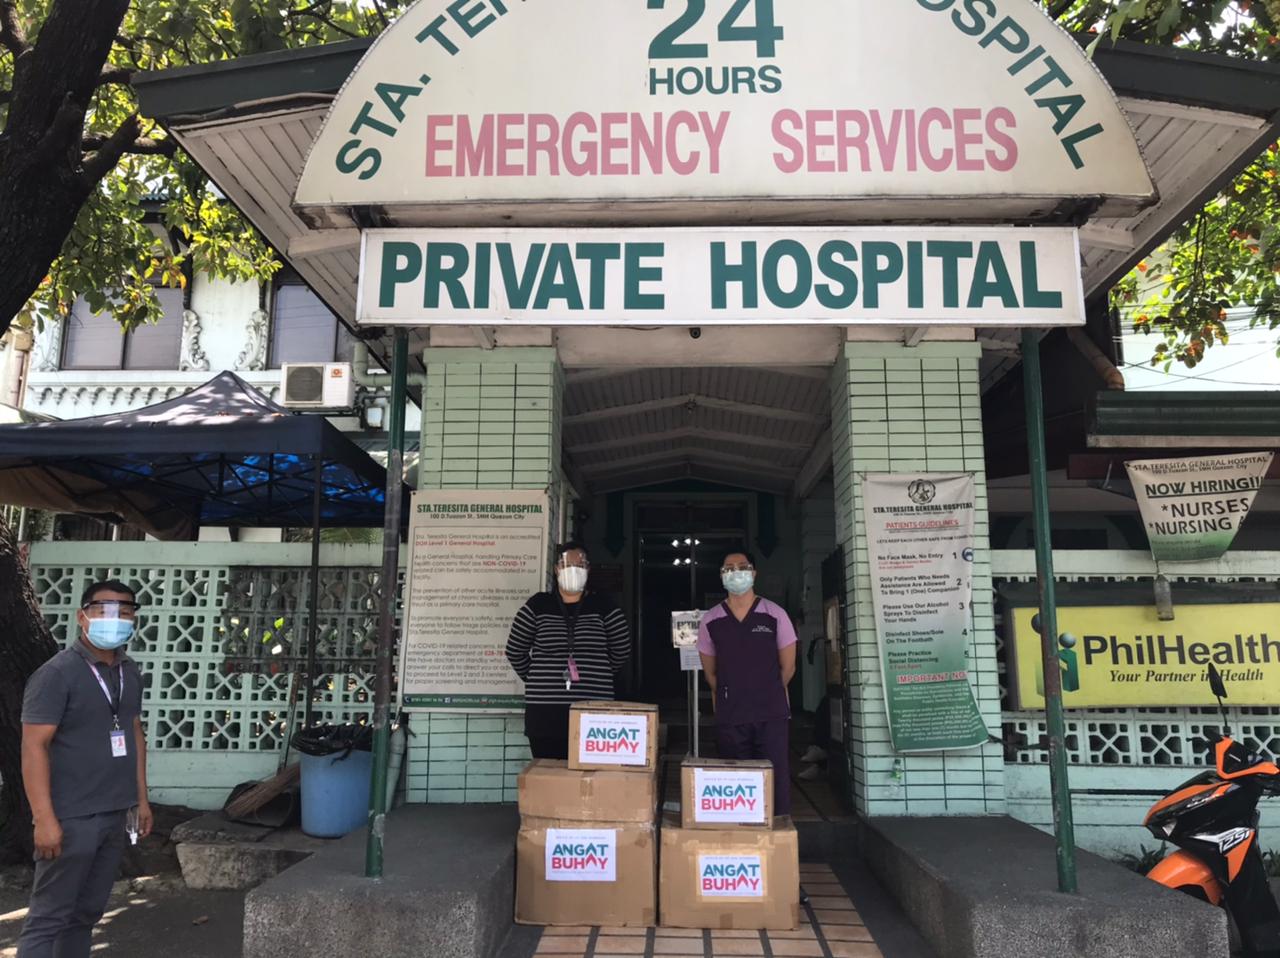 The office of Vice President Leni Robredo continues this week its increased distribution of personal protective equipment (PPE) sets, reusable protective suits, and other medical supplies to various hospitals, local government units and other health facilities, as part of its support for those at the forefront in the fight against COVID-19. (OVP)